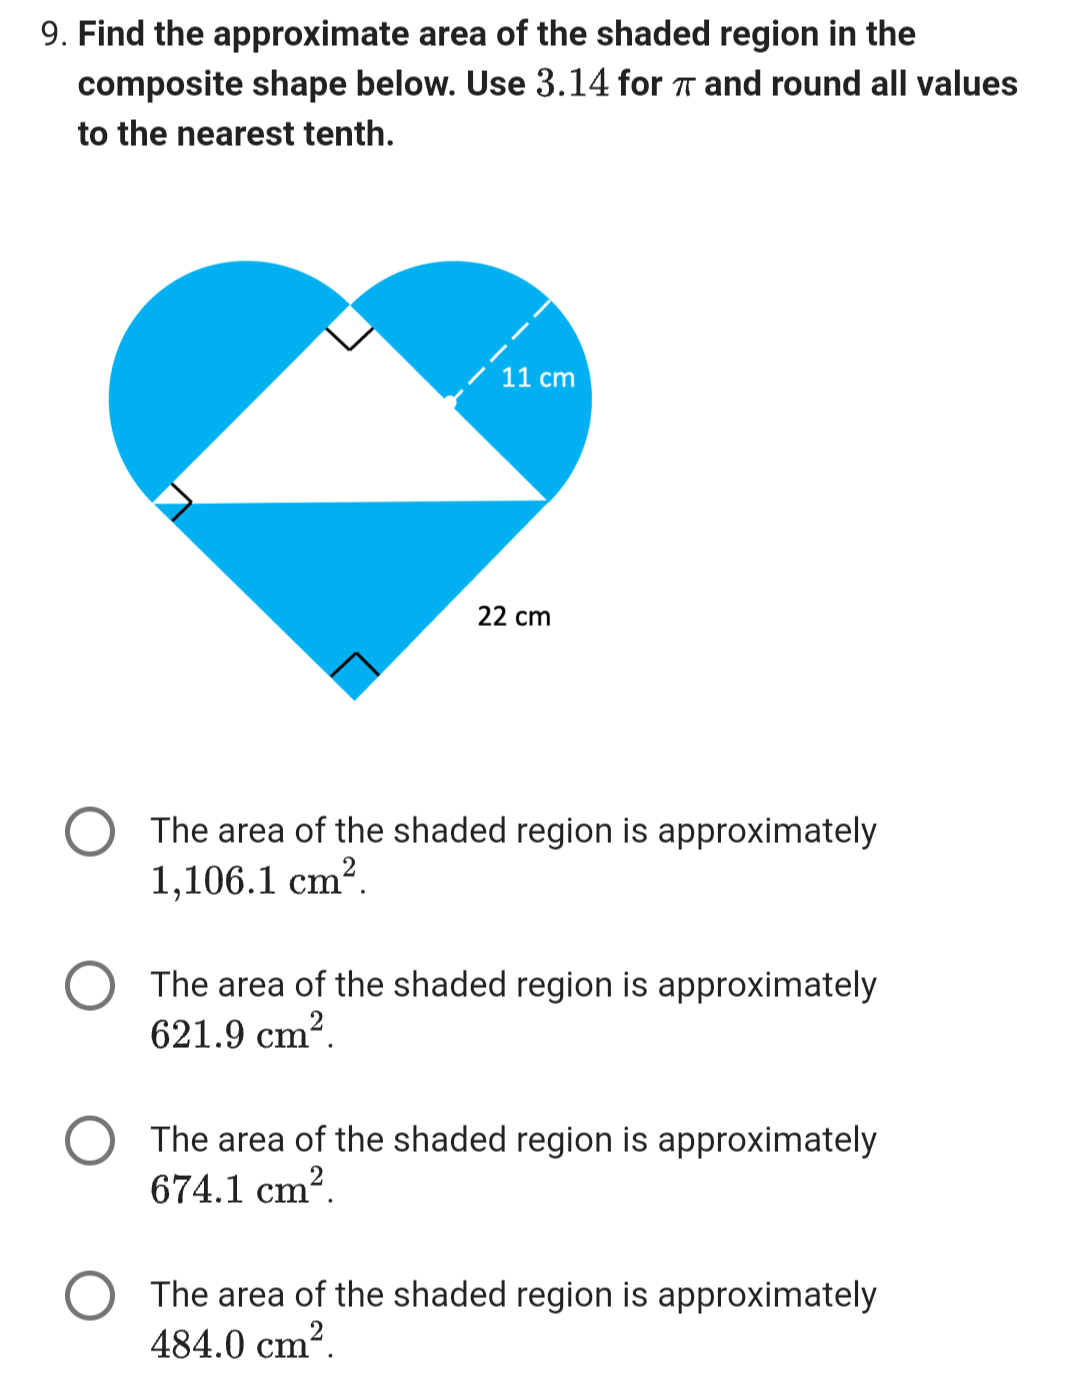 9. Find the approximate area of the shaded region in the
composite shape below. Use 3.14 for π and round all values
to the nearest tenth.
11 cm
22 cm
The area of the shaded region is approximately
1,106.1 cm².
The area of the shaded region is approximately
621.9 cm².
The area of the shaded region is approximately
674.1 cm².
The area of the shaded region is approximately
484.0 cm².